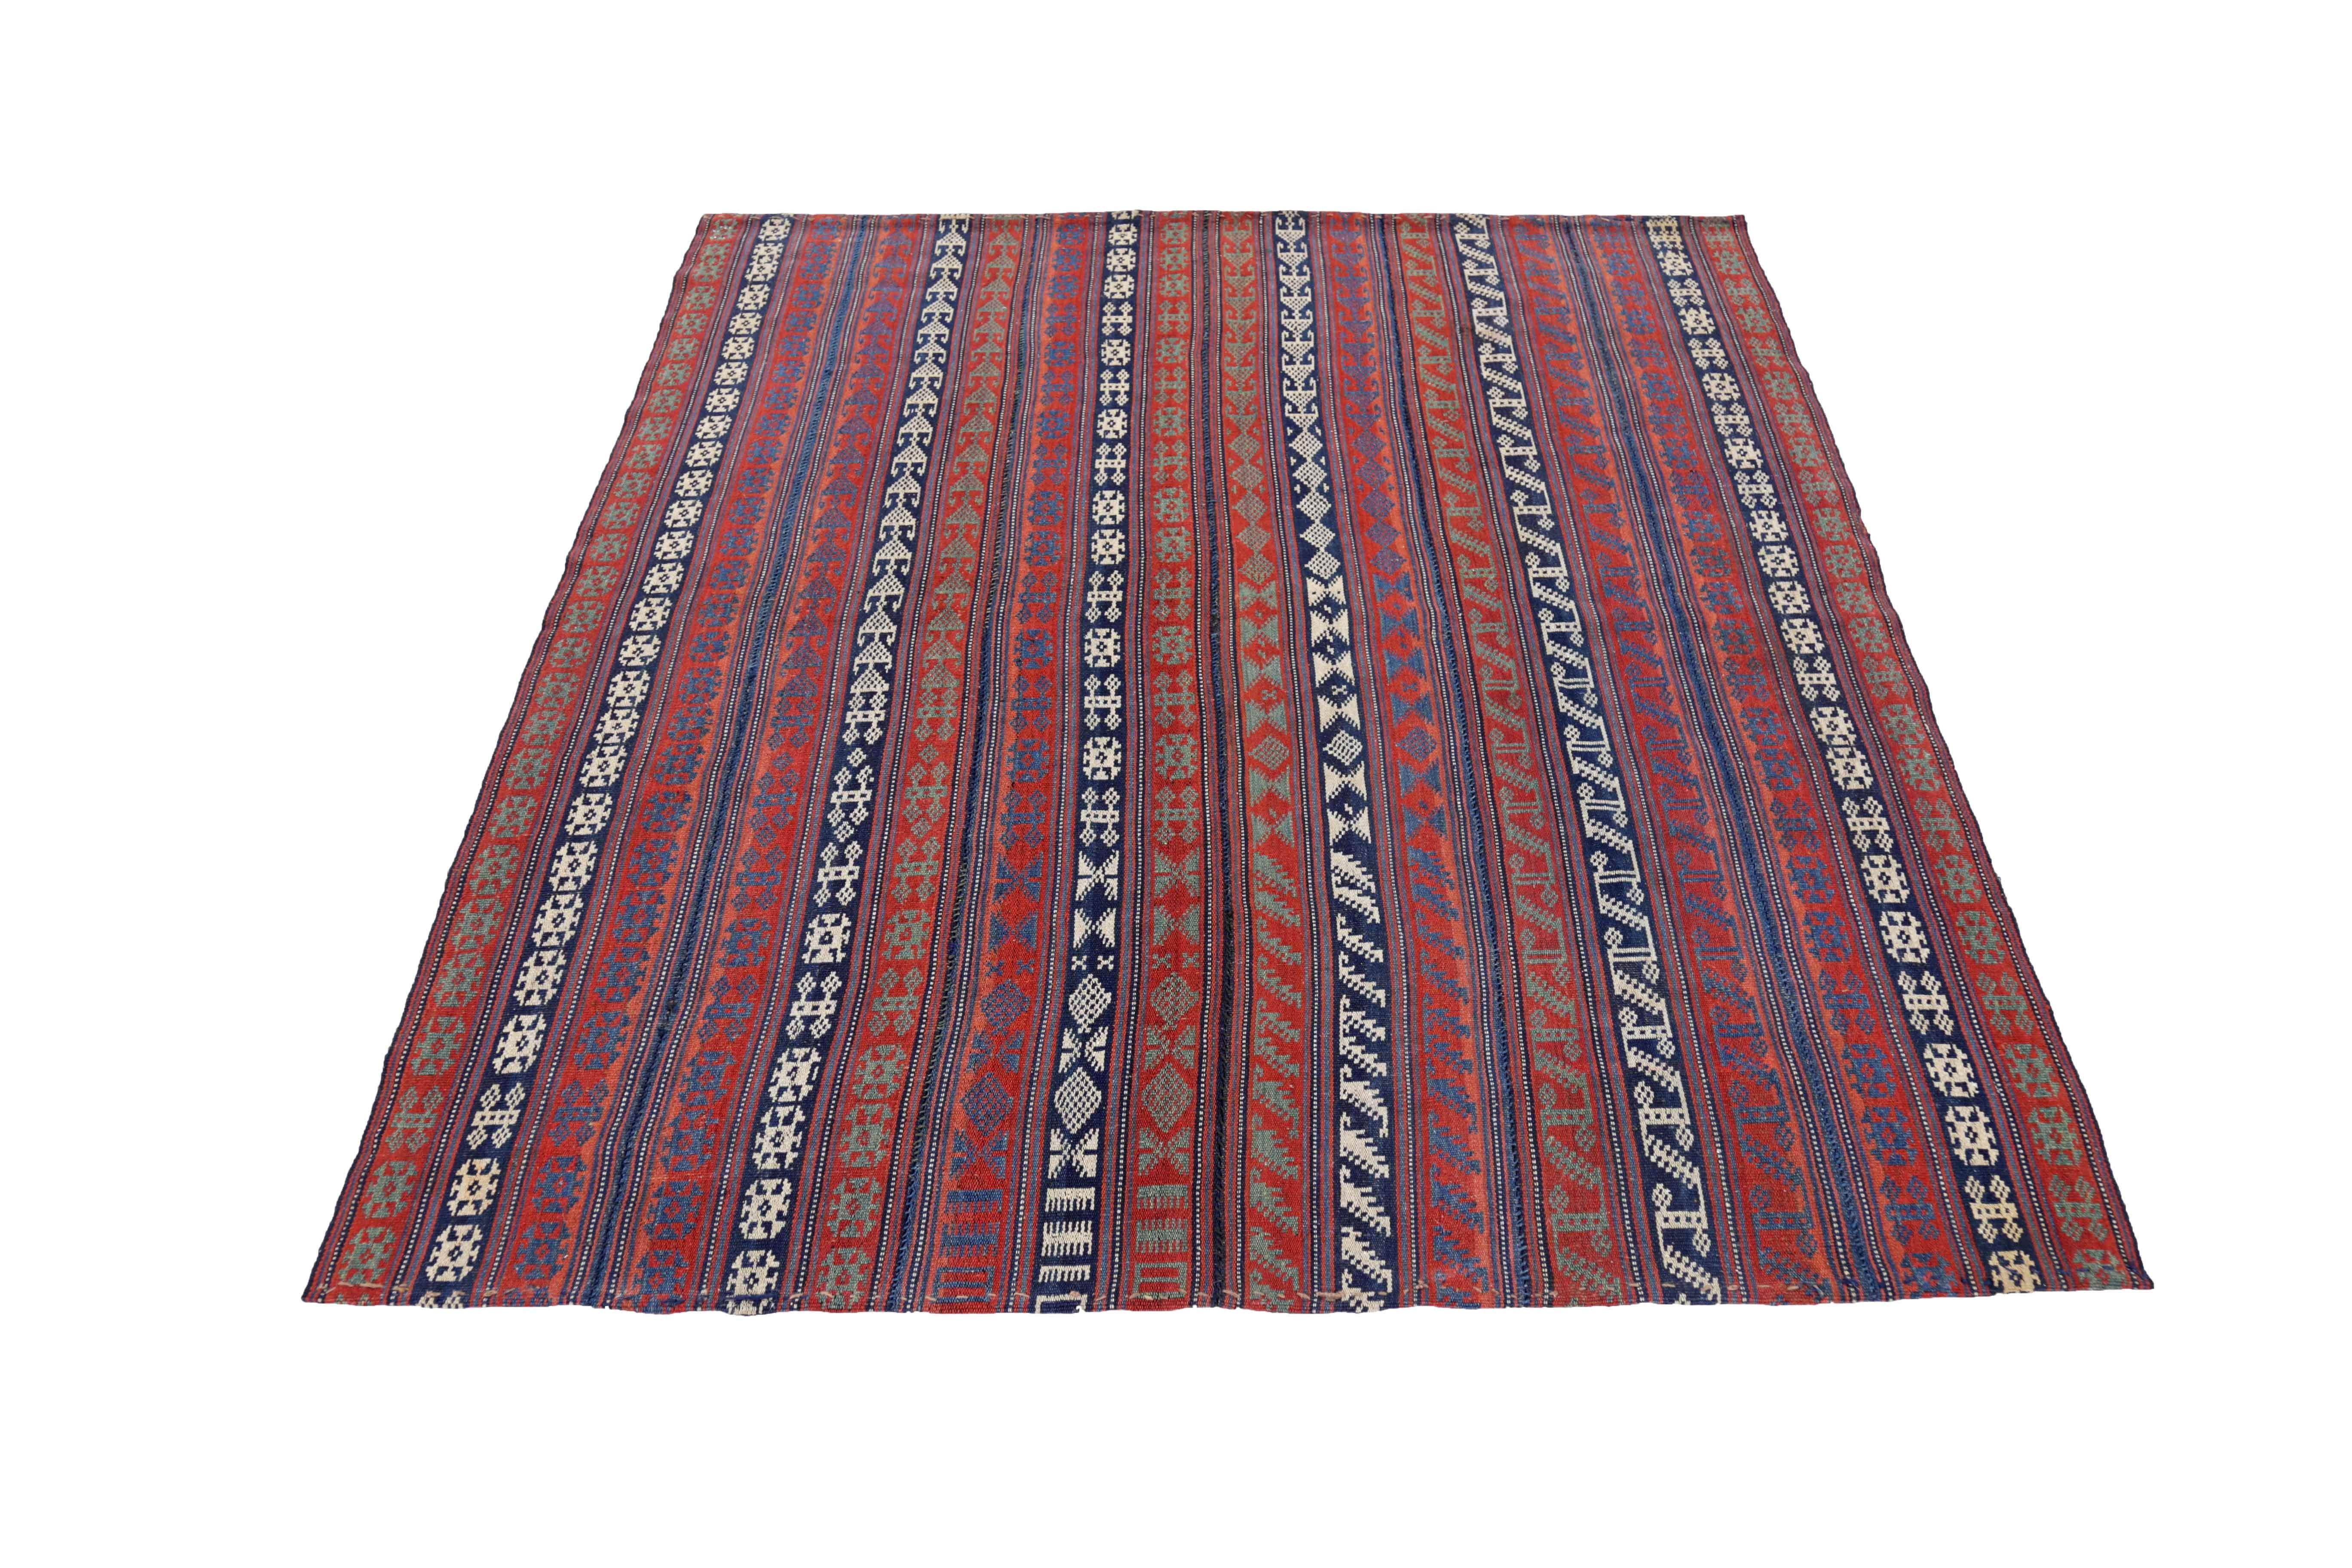 Antique Persian square rug handwoven from the finest sheep’s wool. It’s colored with all-natural vegetable dyes that are safe for humans and pets. It’s a traditional Jajm design handwoven by expert artisans. It’s a lovely square rug that can be